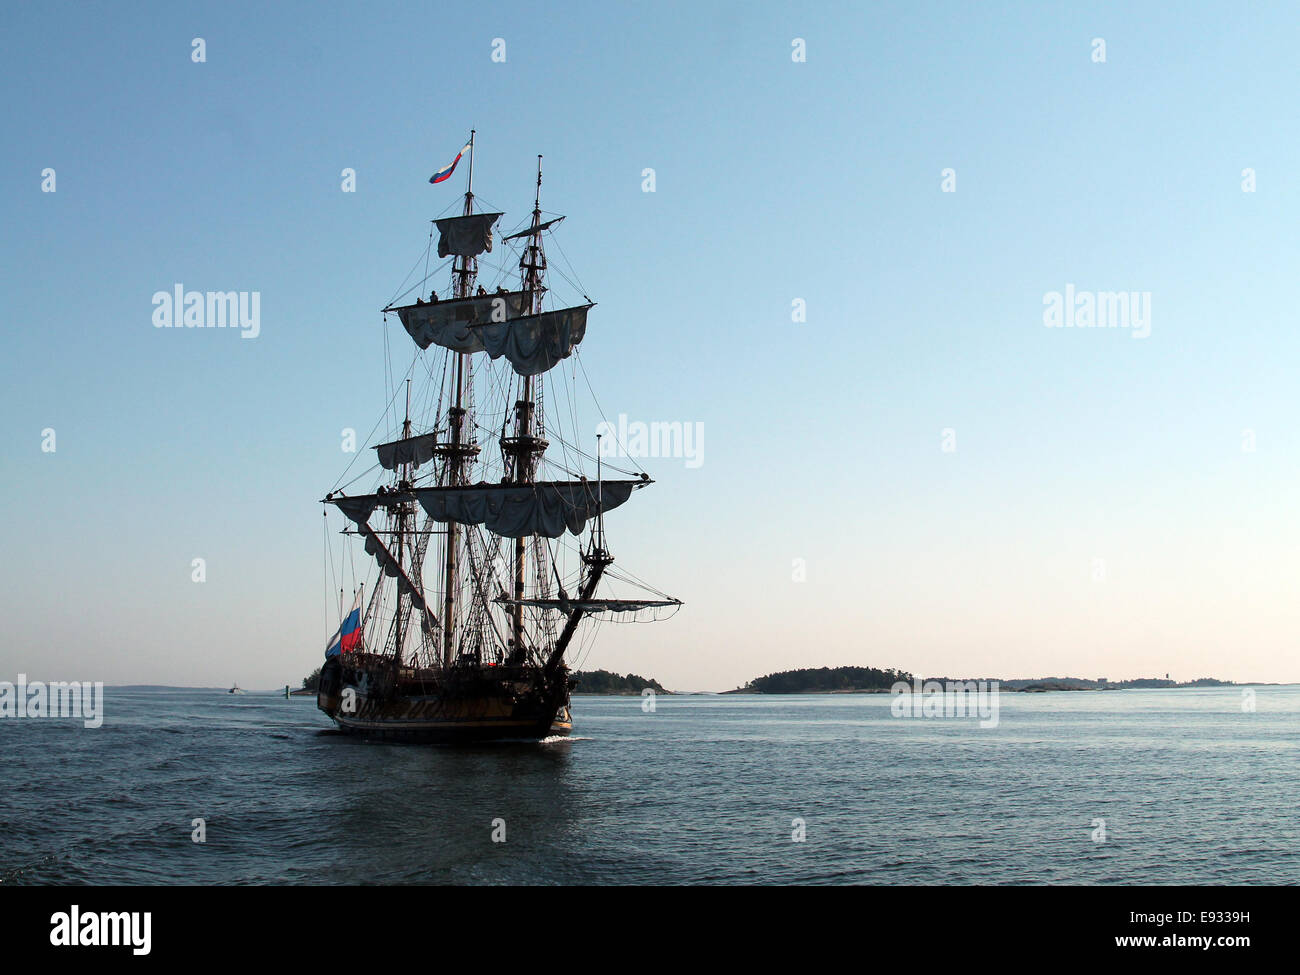 Russian old pirate-style ship in Finland Stock Photo